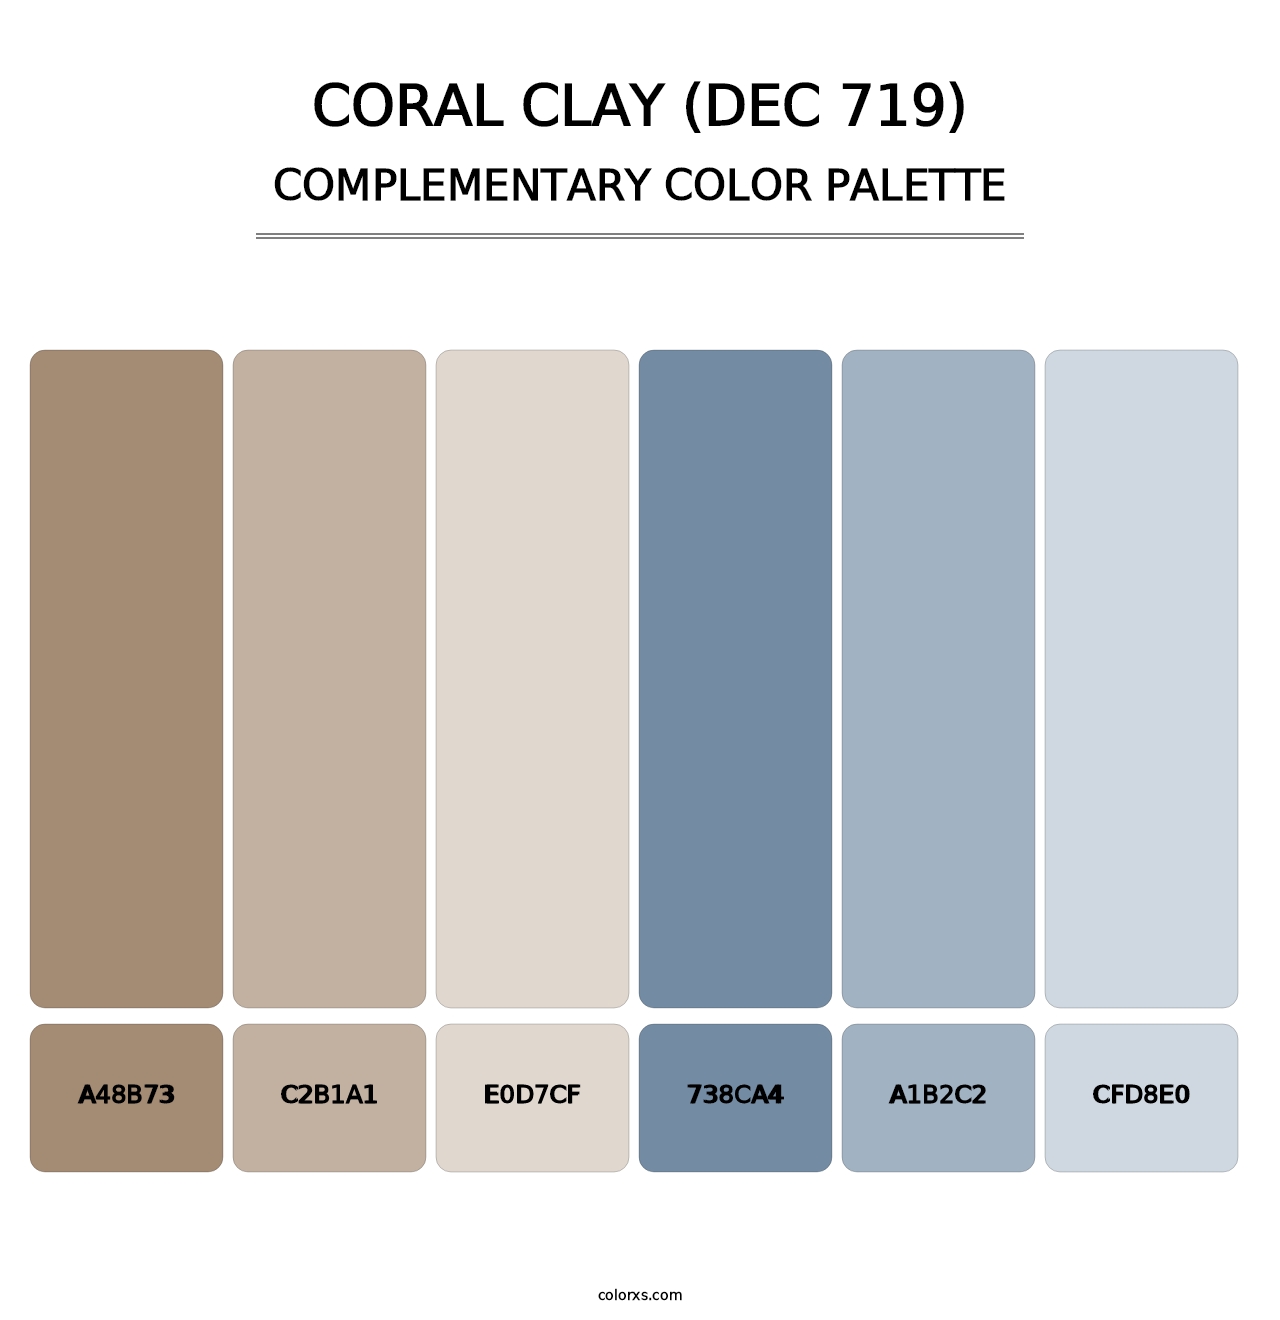 Coral Clay (DEC 719) - Complementary Color Palette